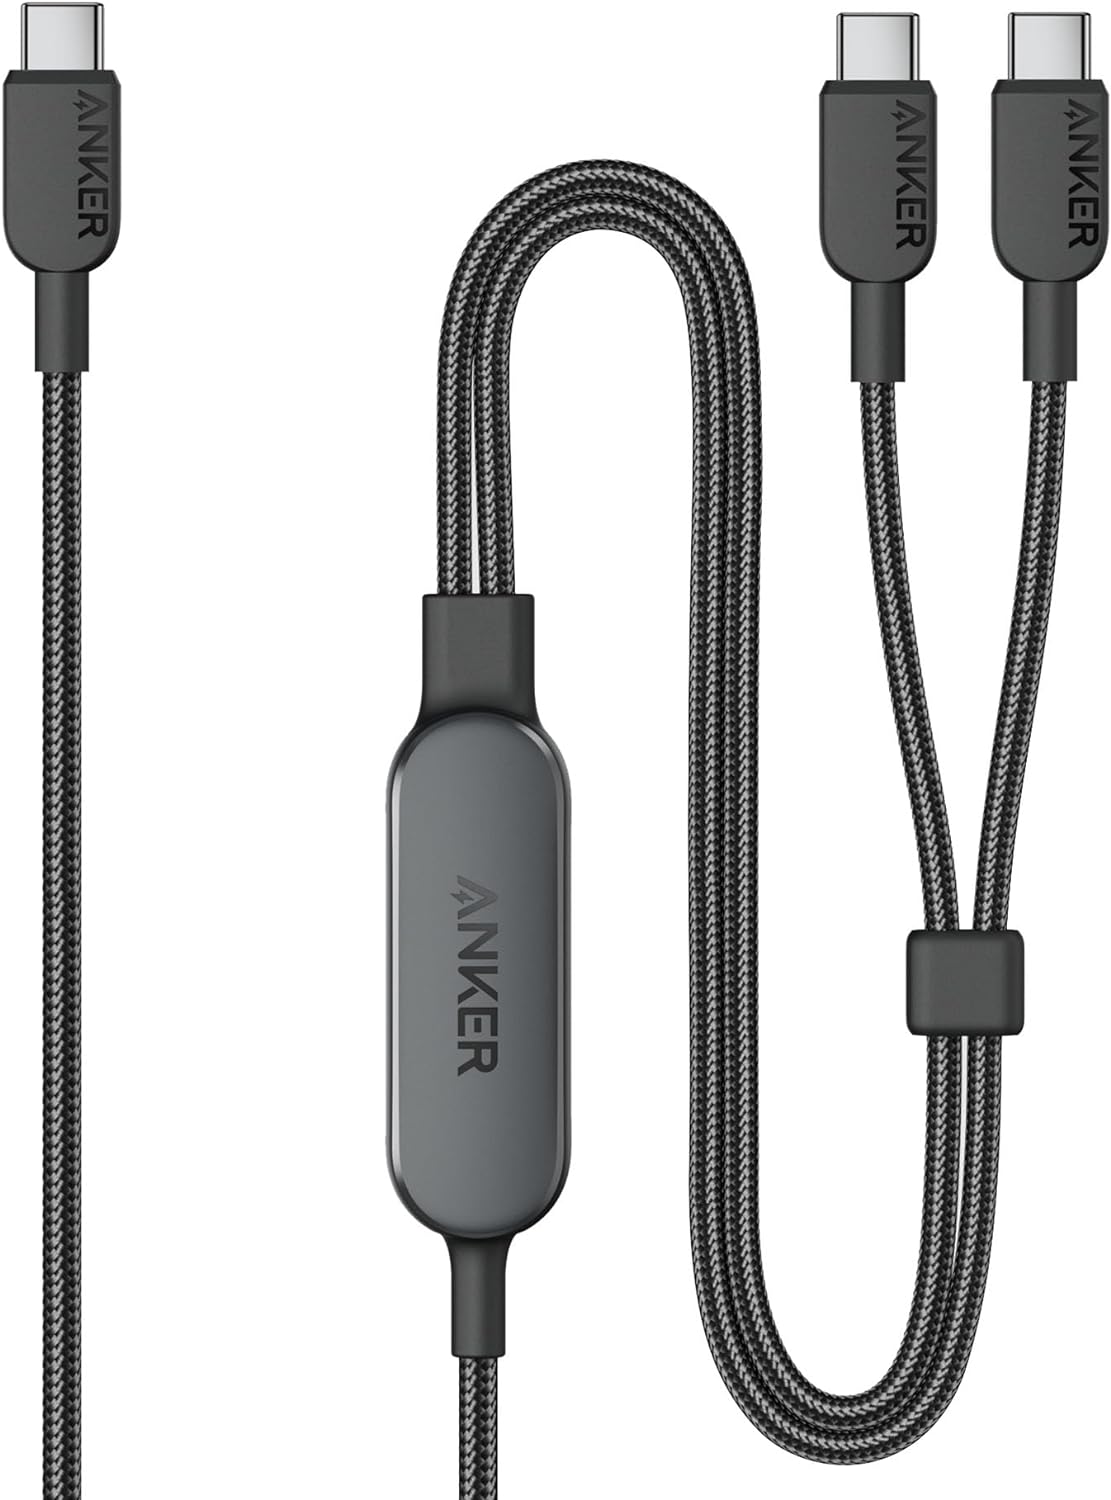 Anker launches new 140W 2-in-1 USB-C to USB-C Cable - NotebookCheck.net ...